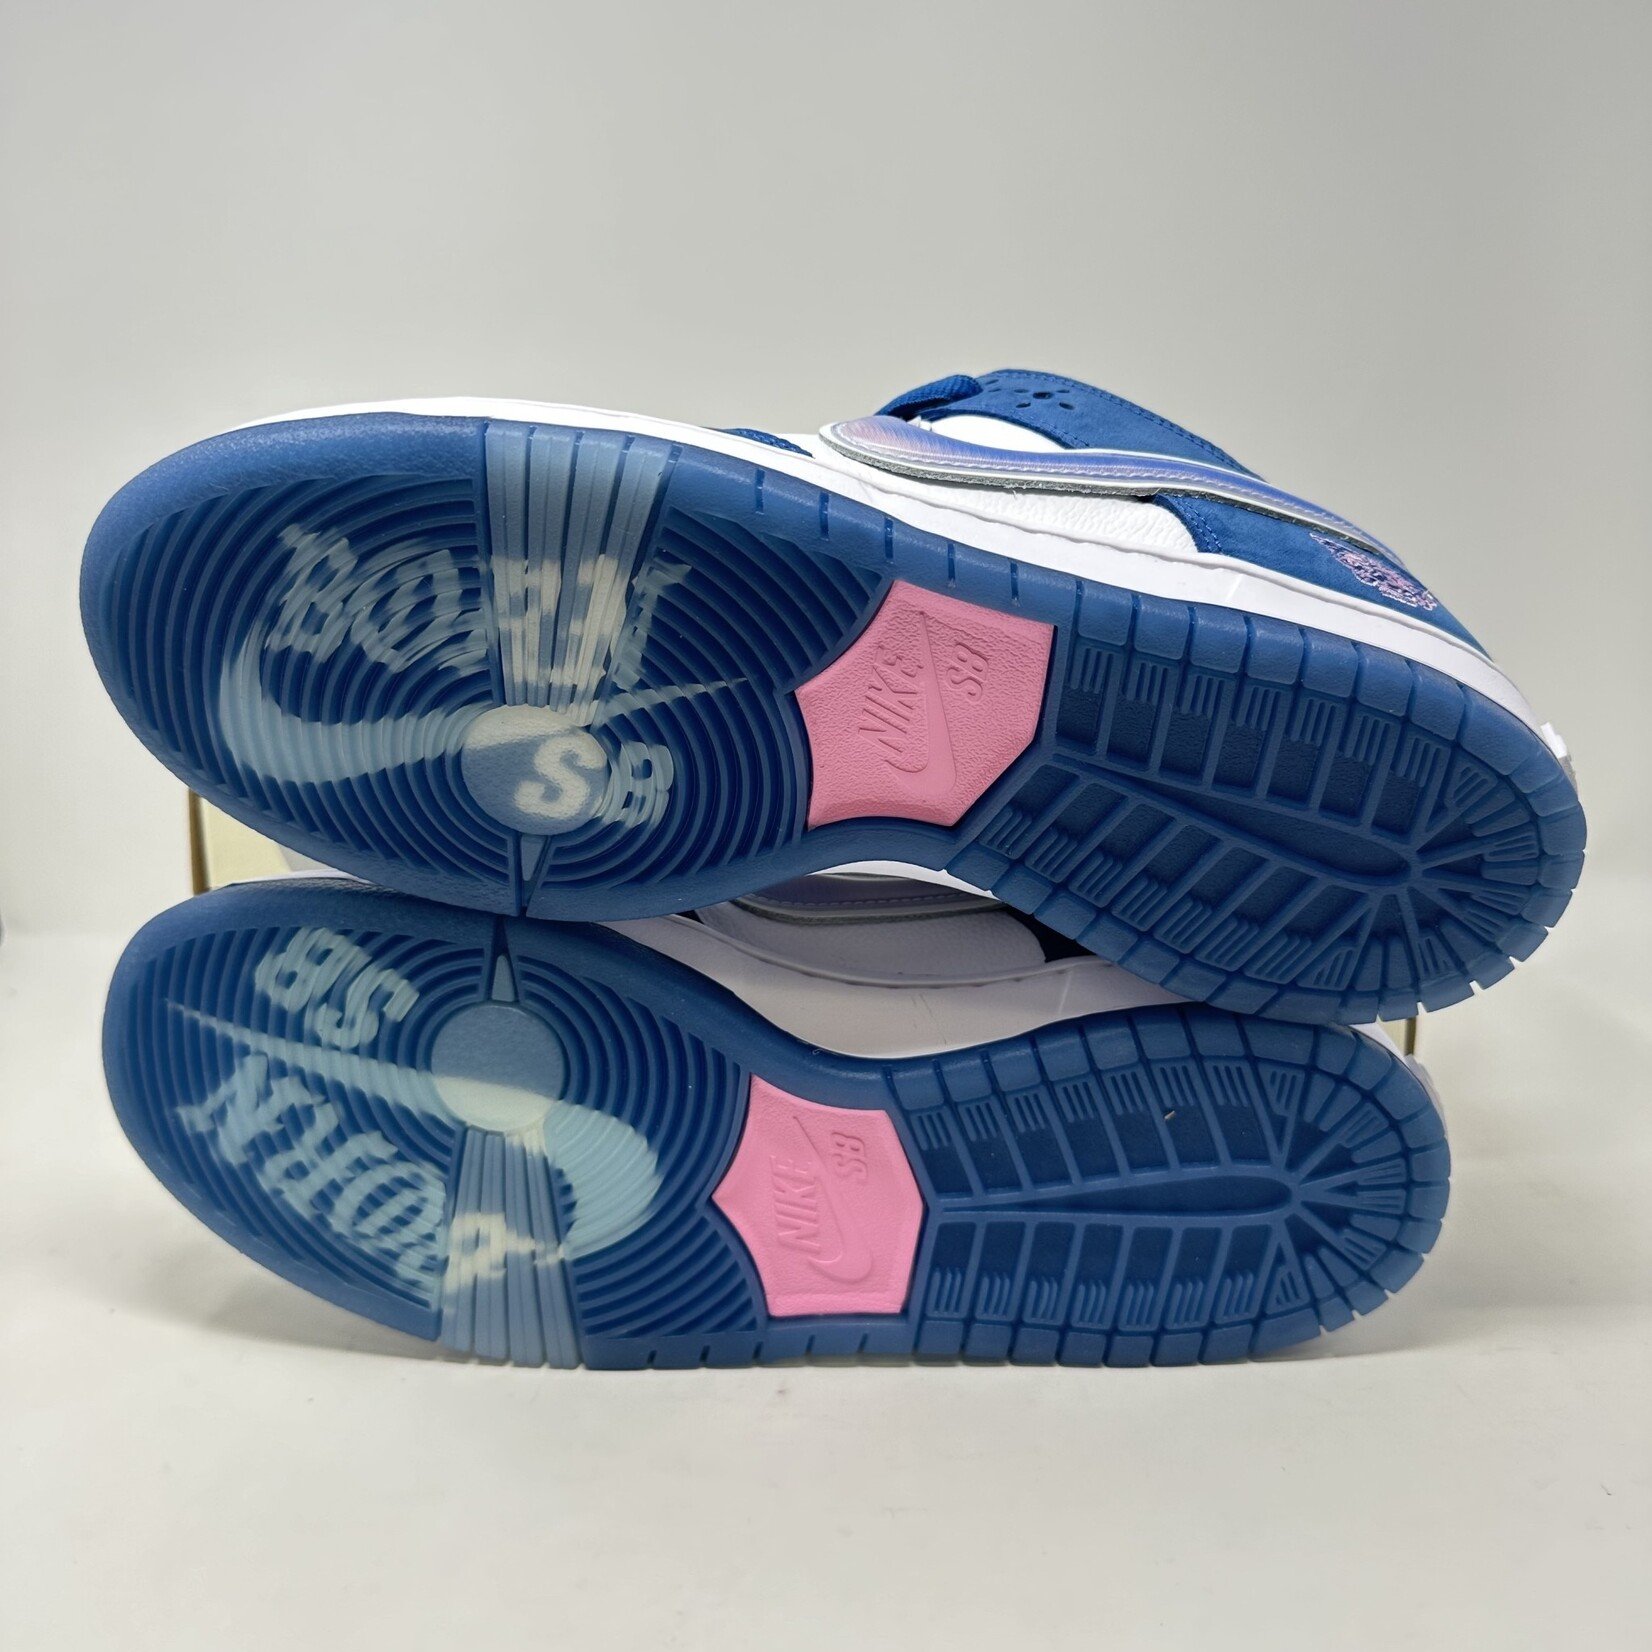 Nike Nike SB Dunk Low Born X Raised One Block At A Time